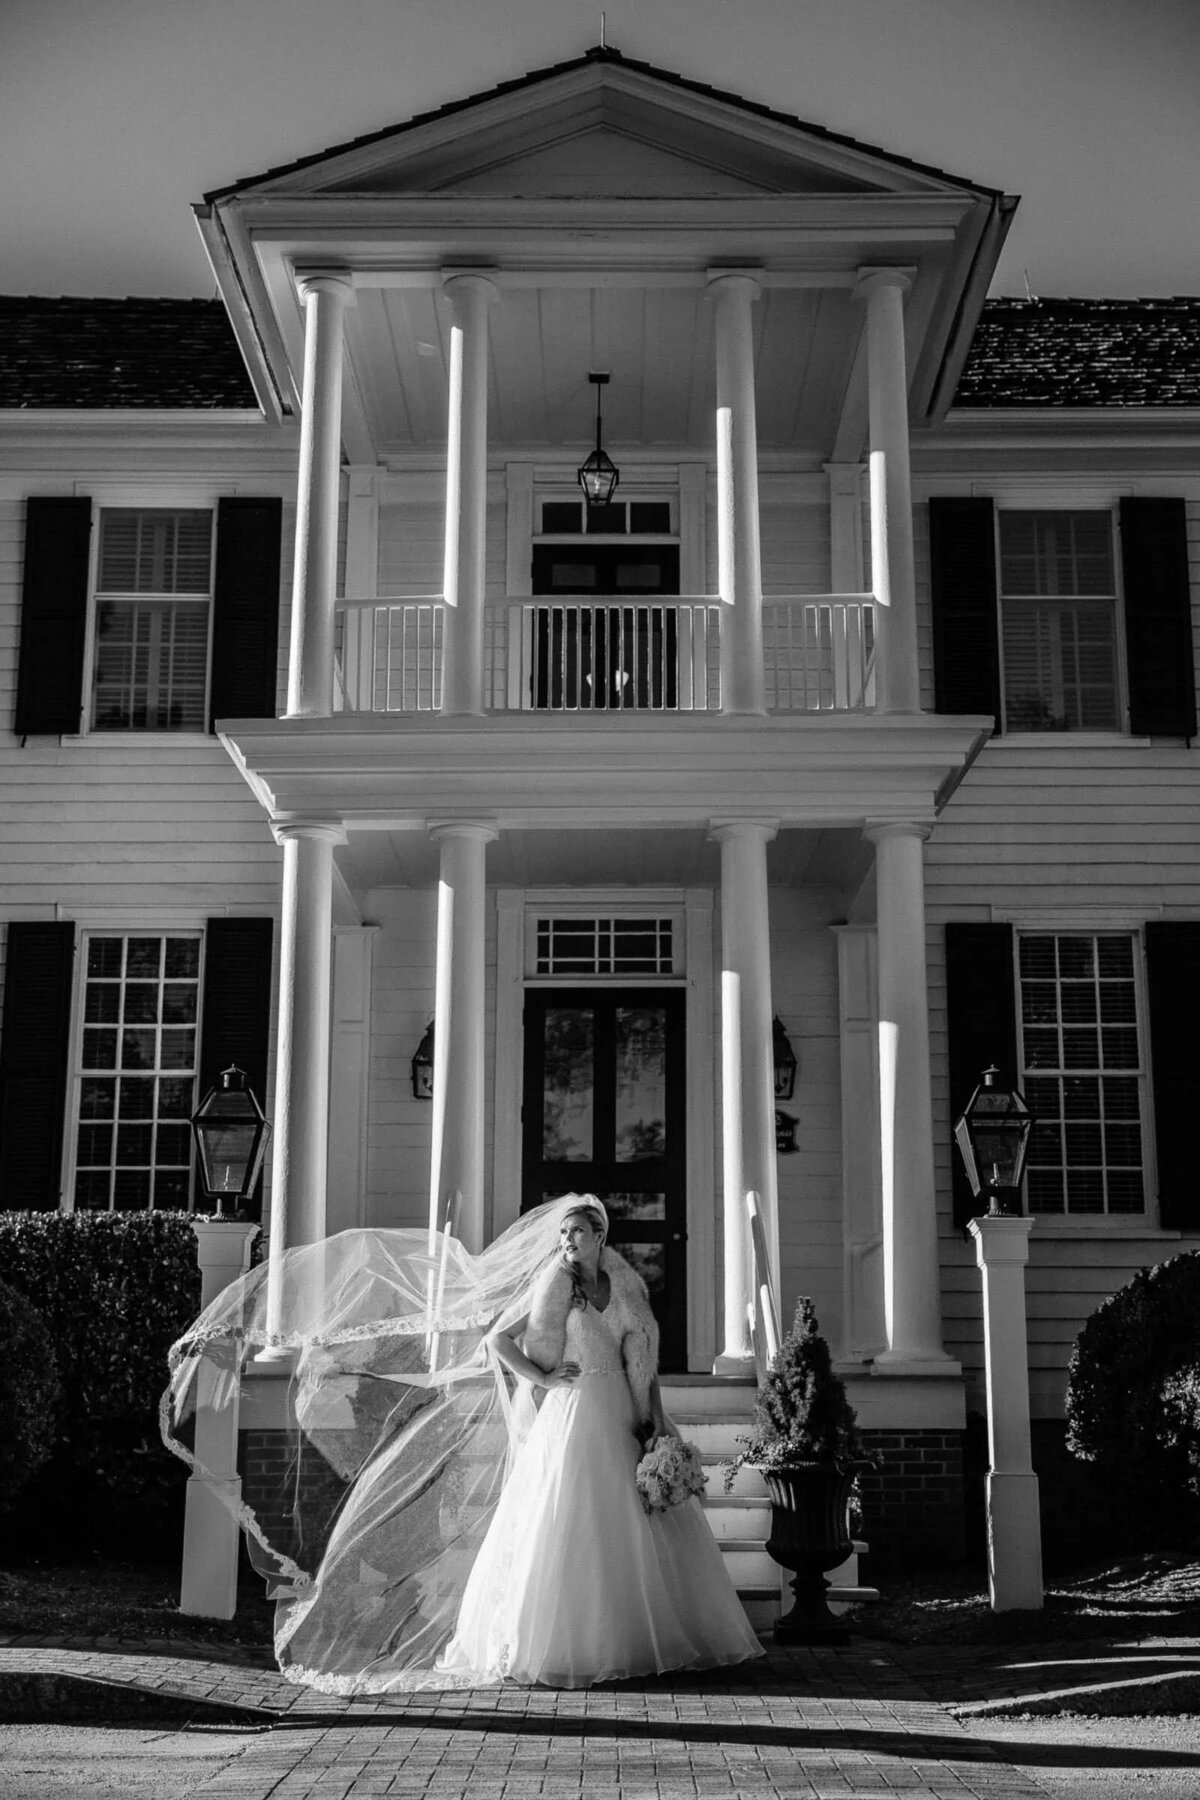 A bride standing in front of a large house